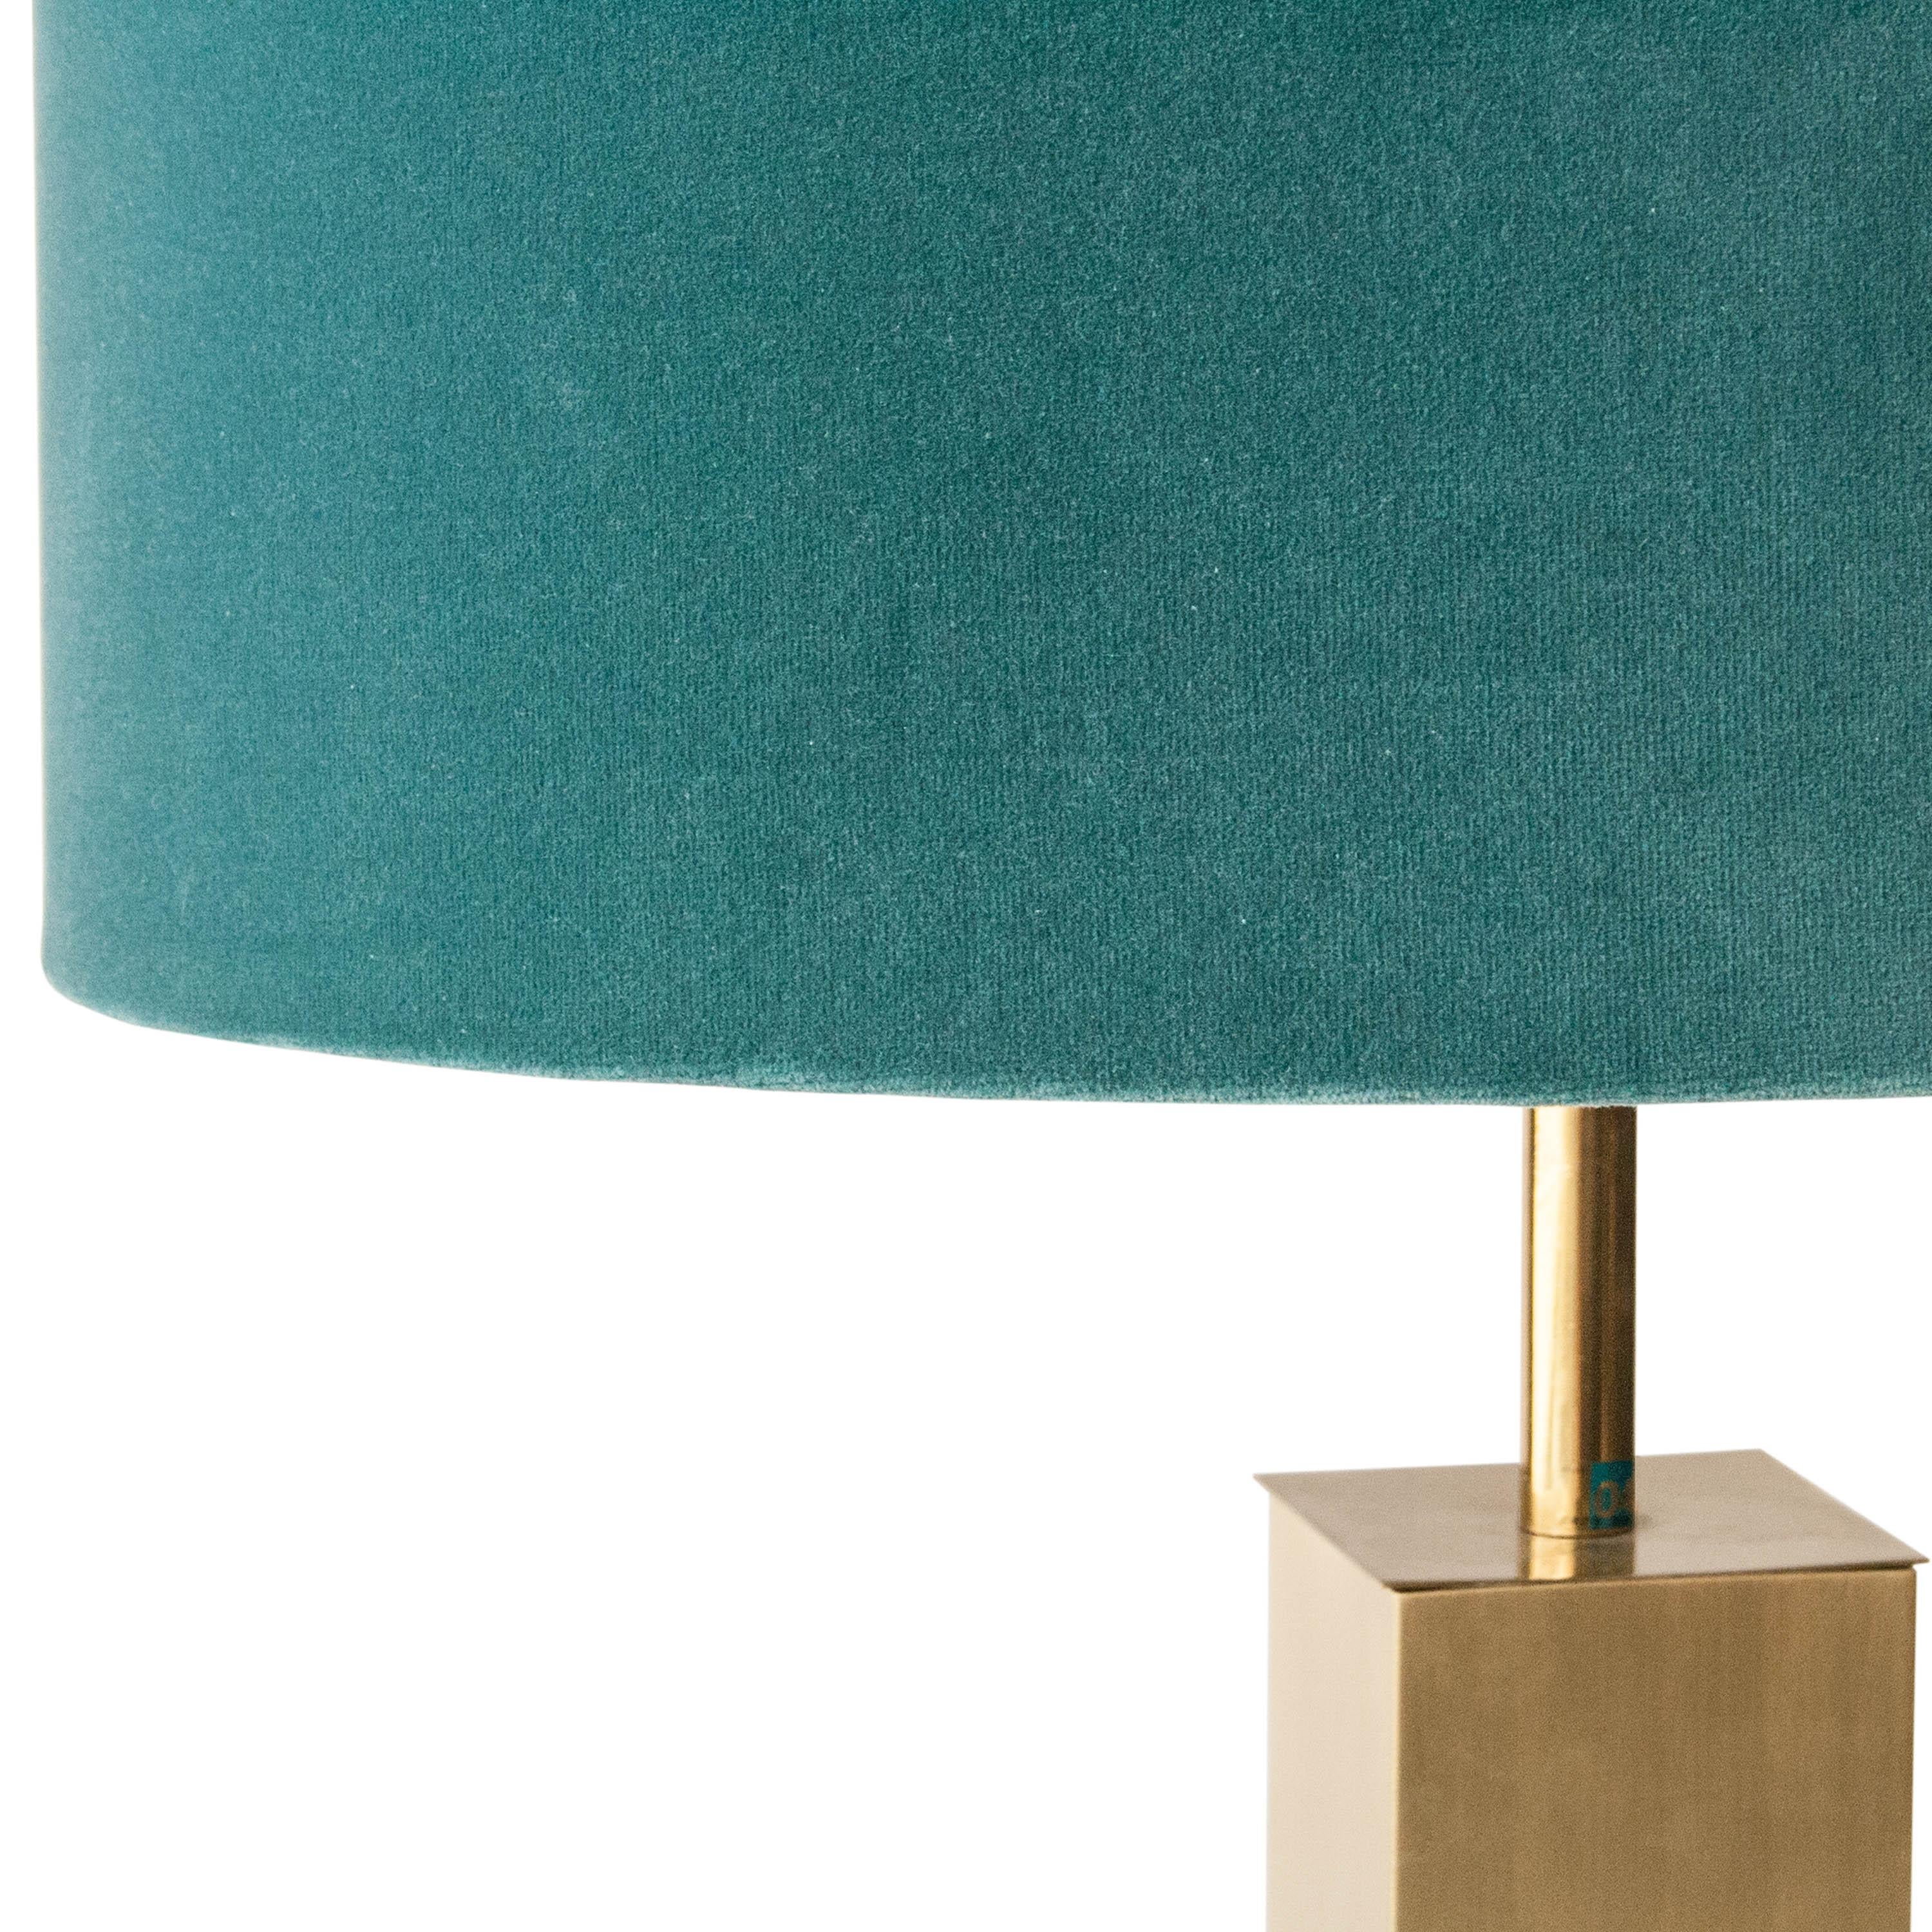 Table lamp with brass structure and turquoise velvet shade, France, 1970.